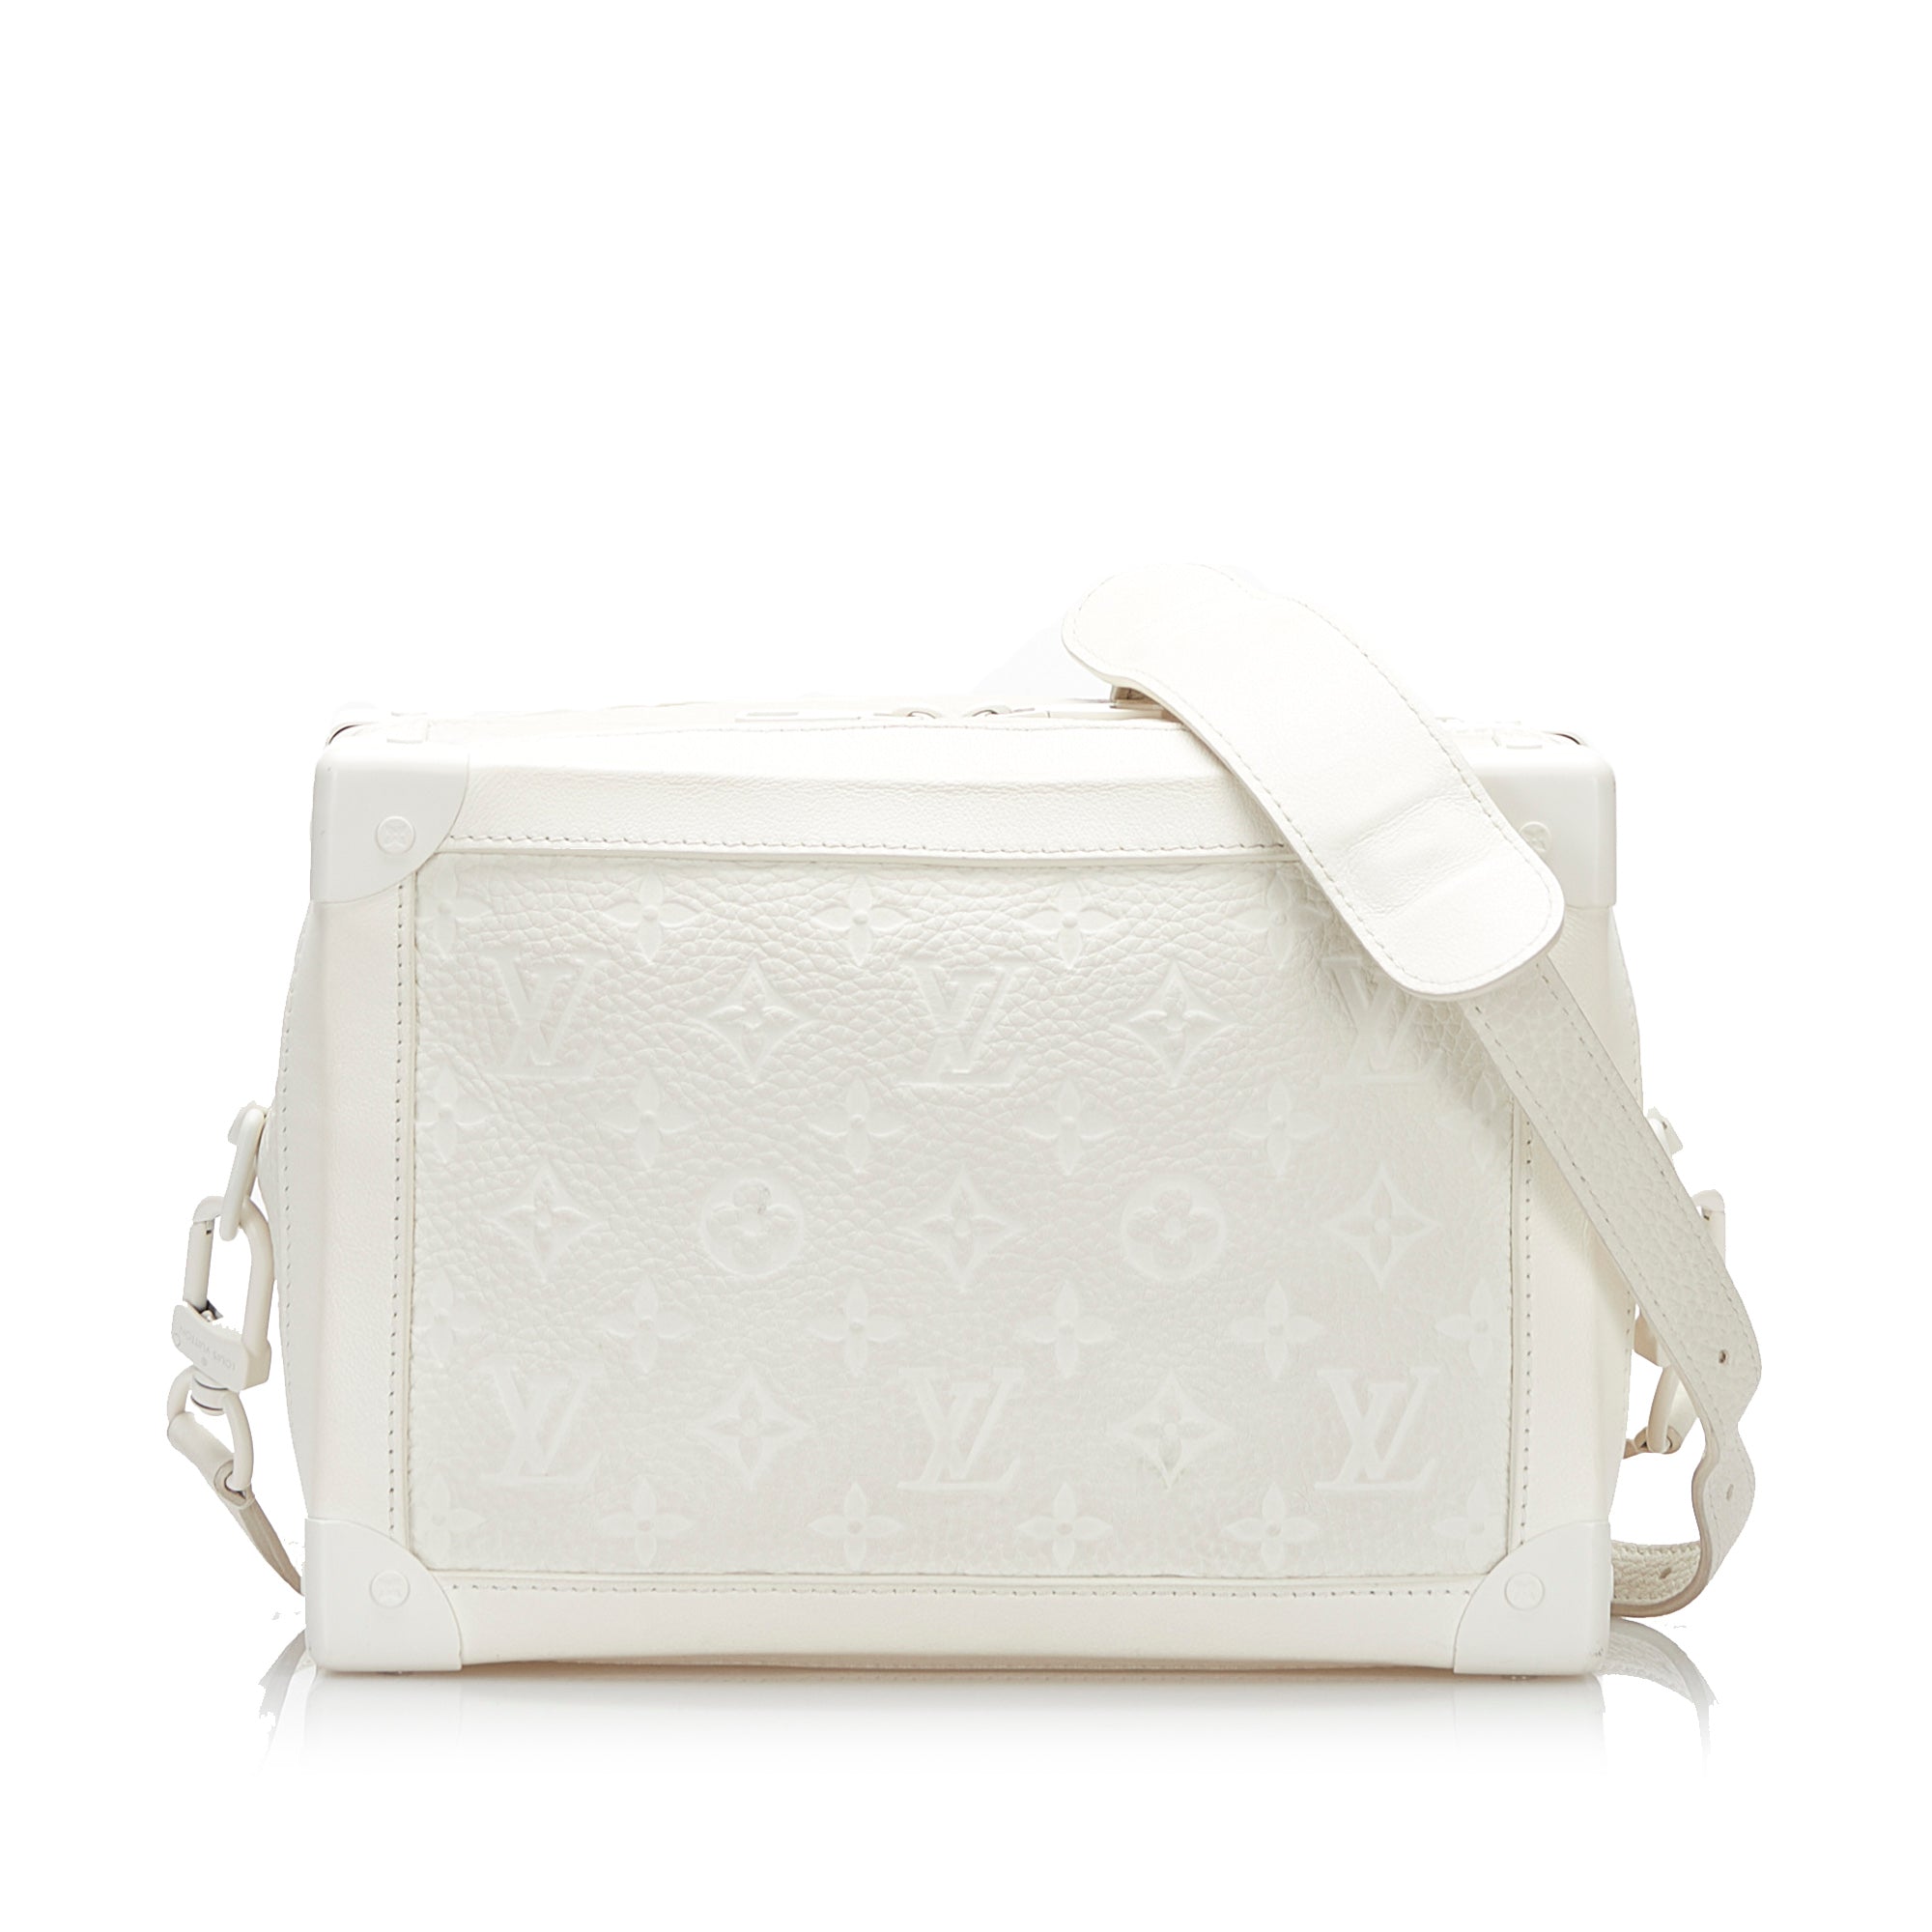 Louis Vuitton Soft Trunk Shoulder Bag in White Leather